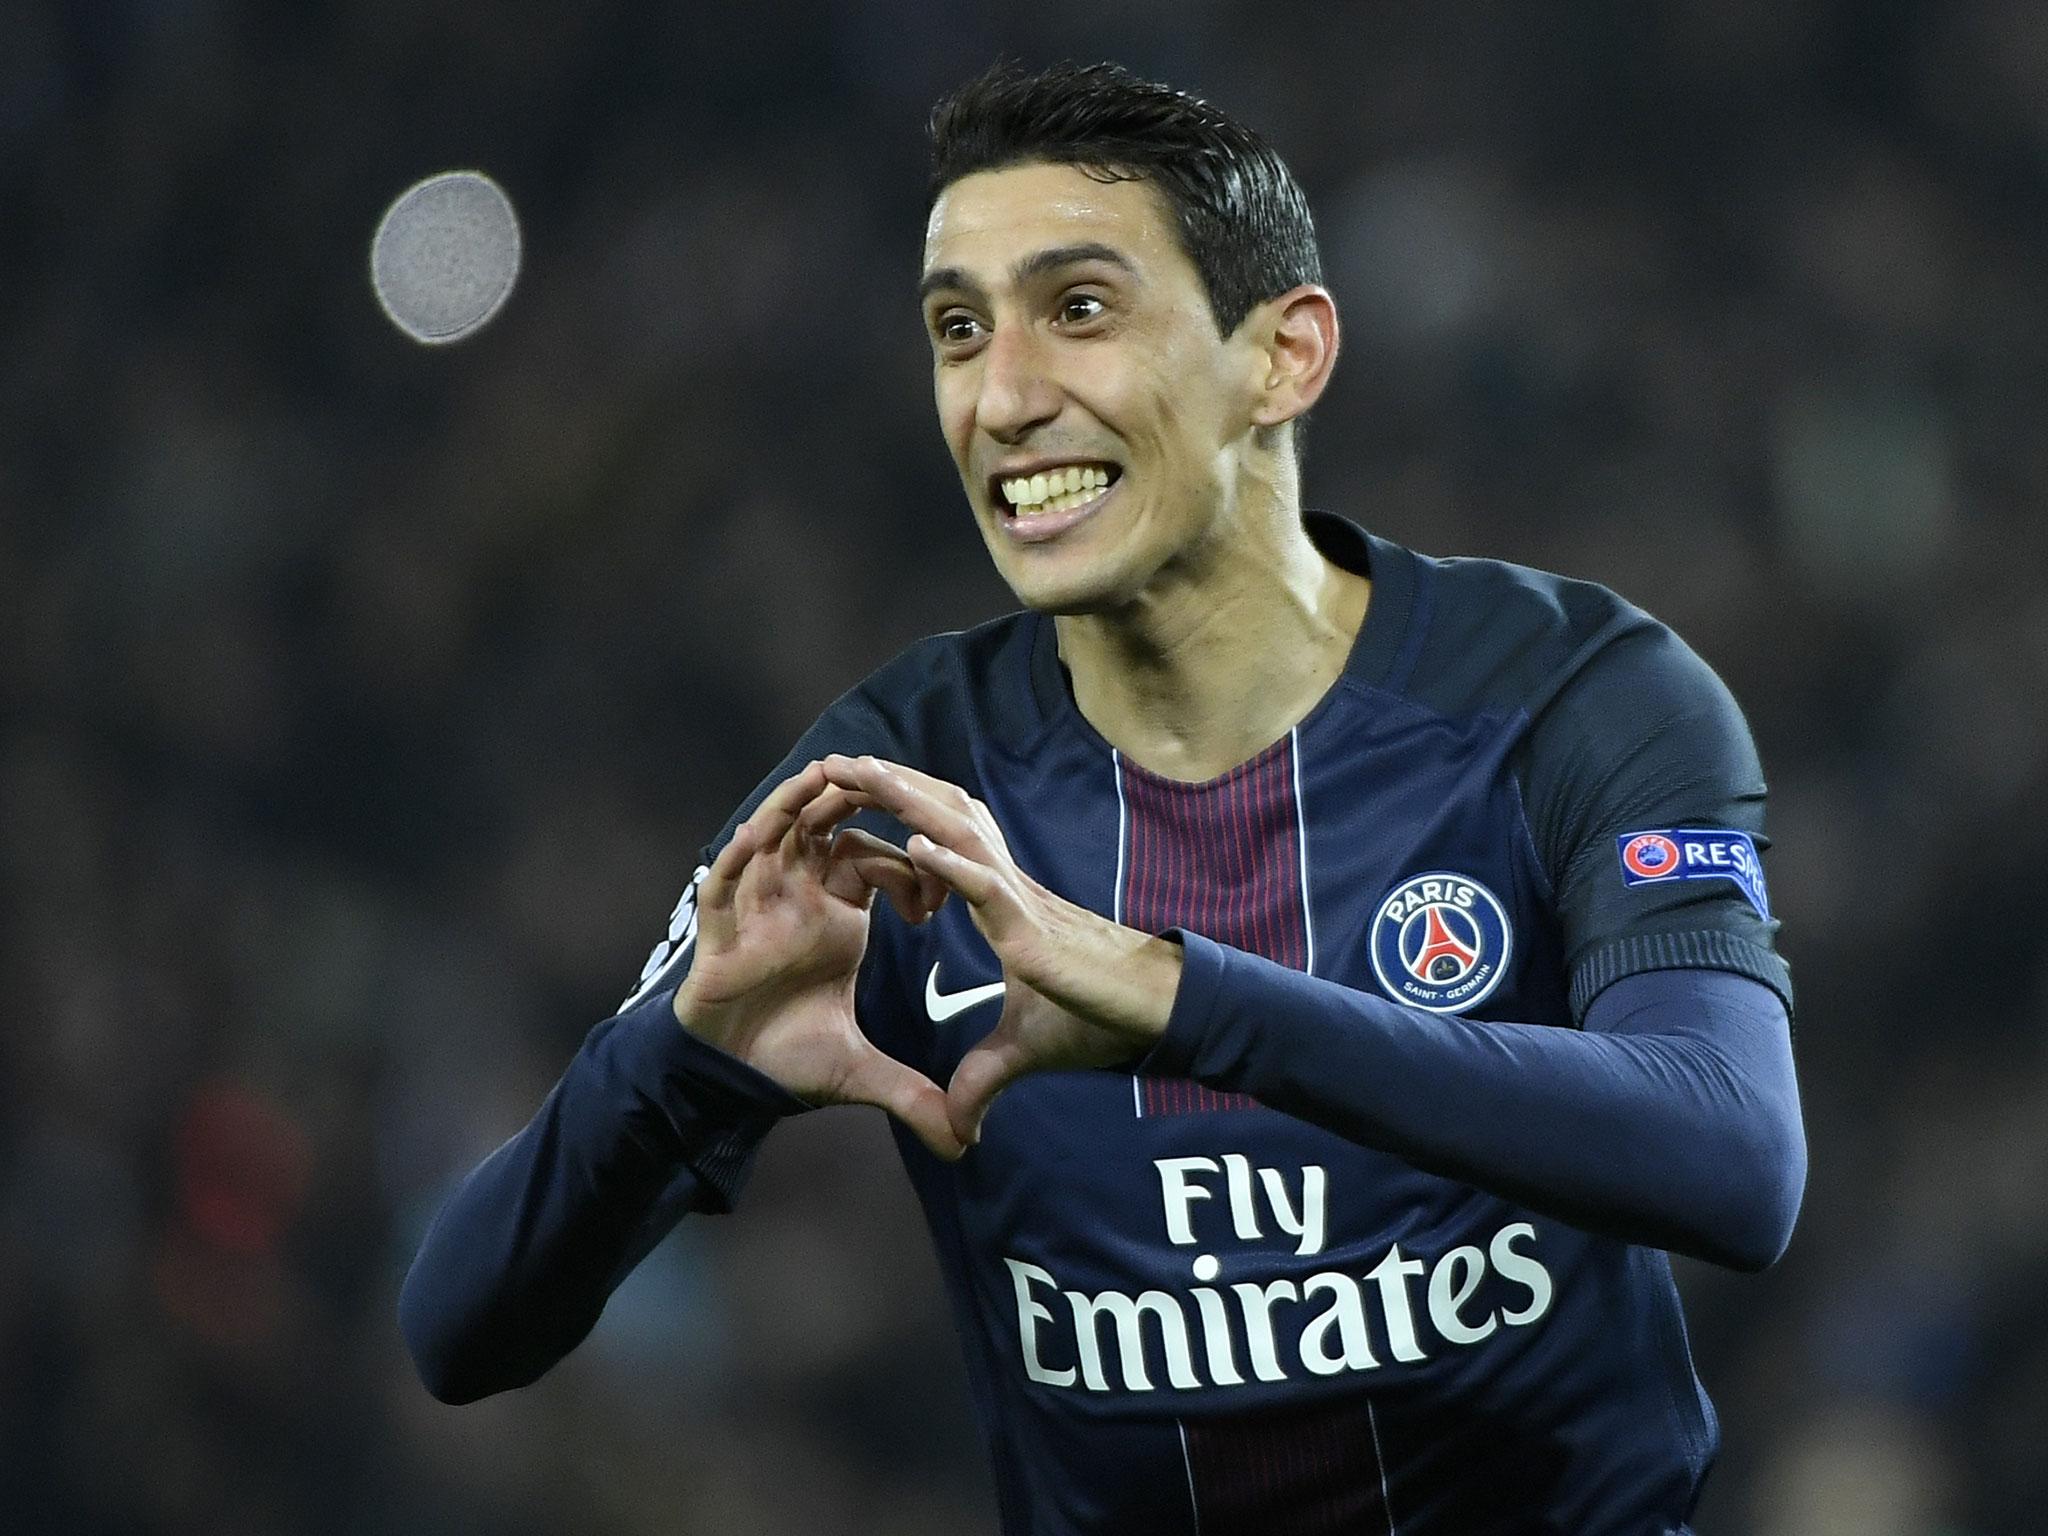 Angel Di Maria believes Paris Saint-Germain can win the Champions League after beating Barcelona 4-0